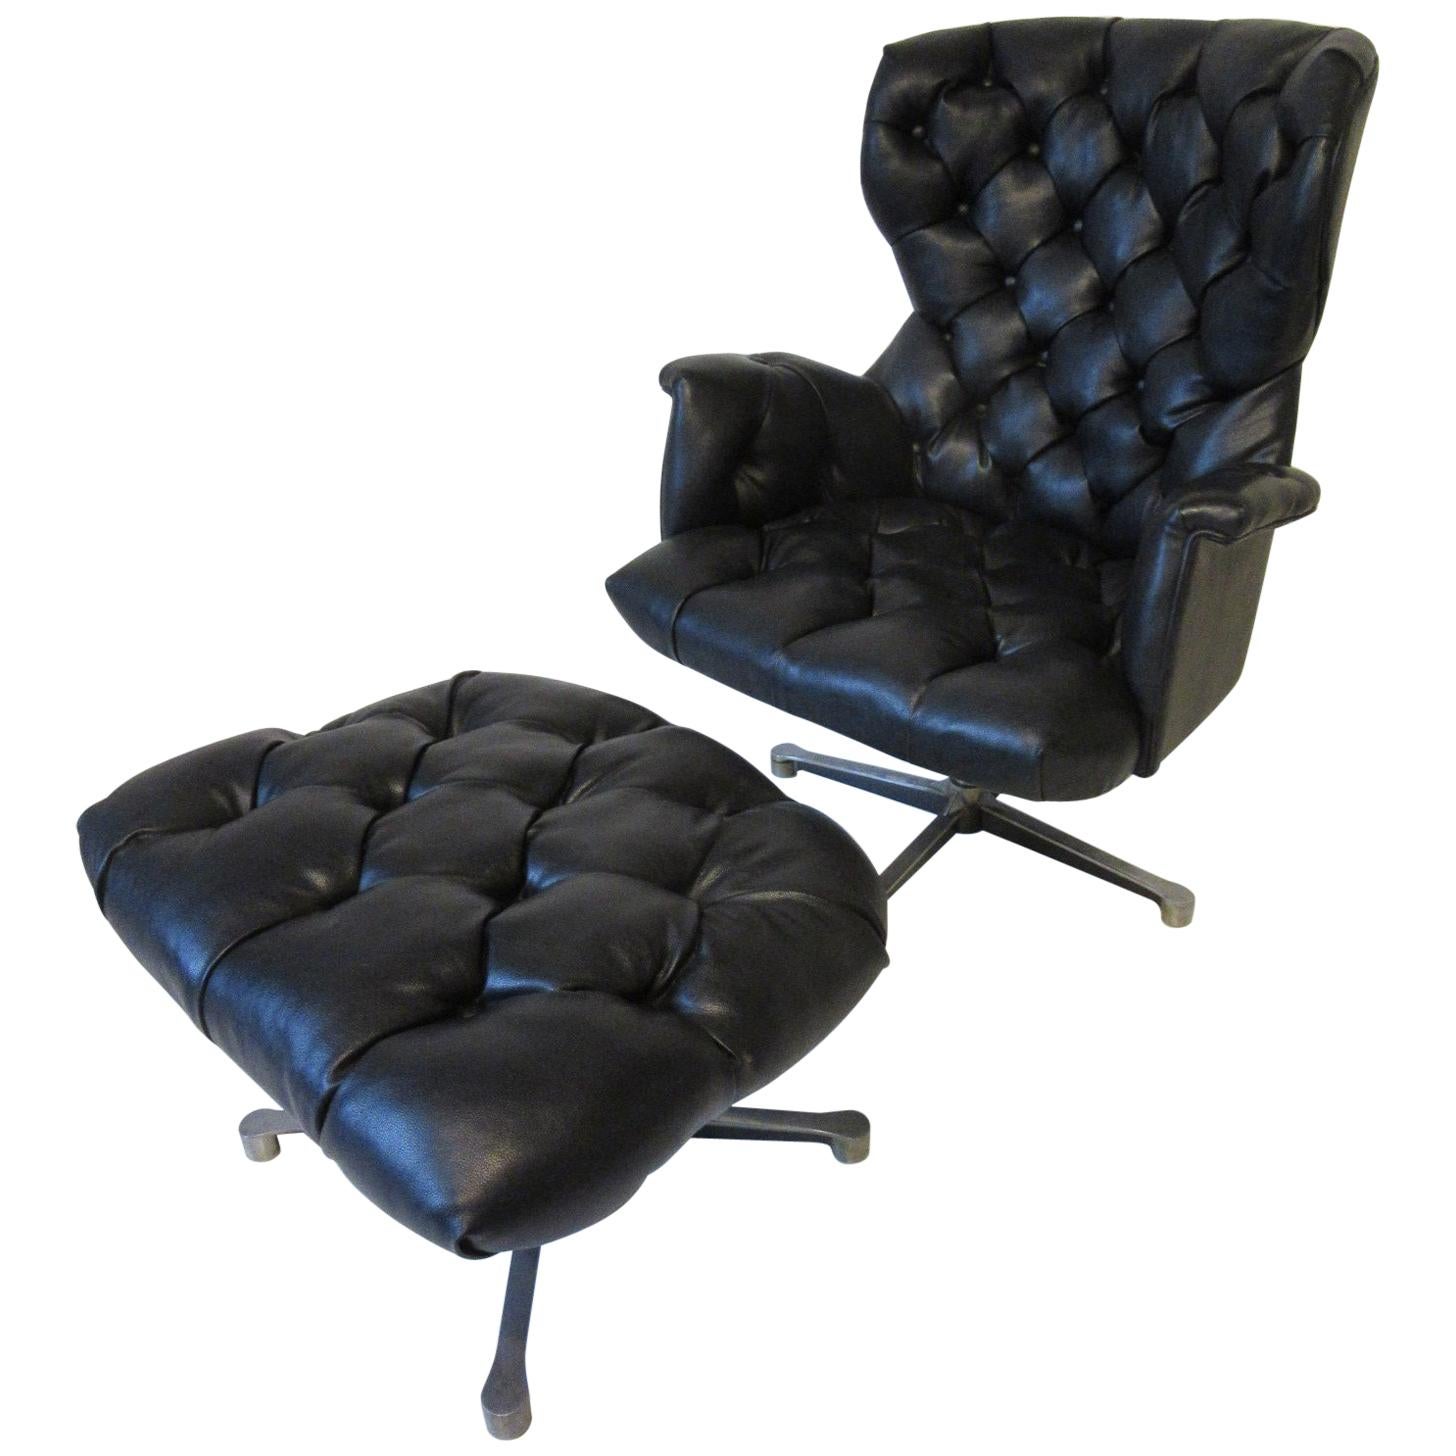 1960s-1970s Black Tufted Lounge Chair with Ottoman